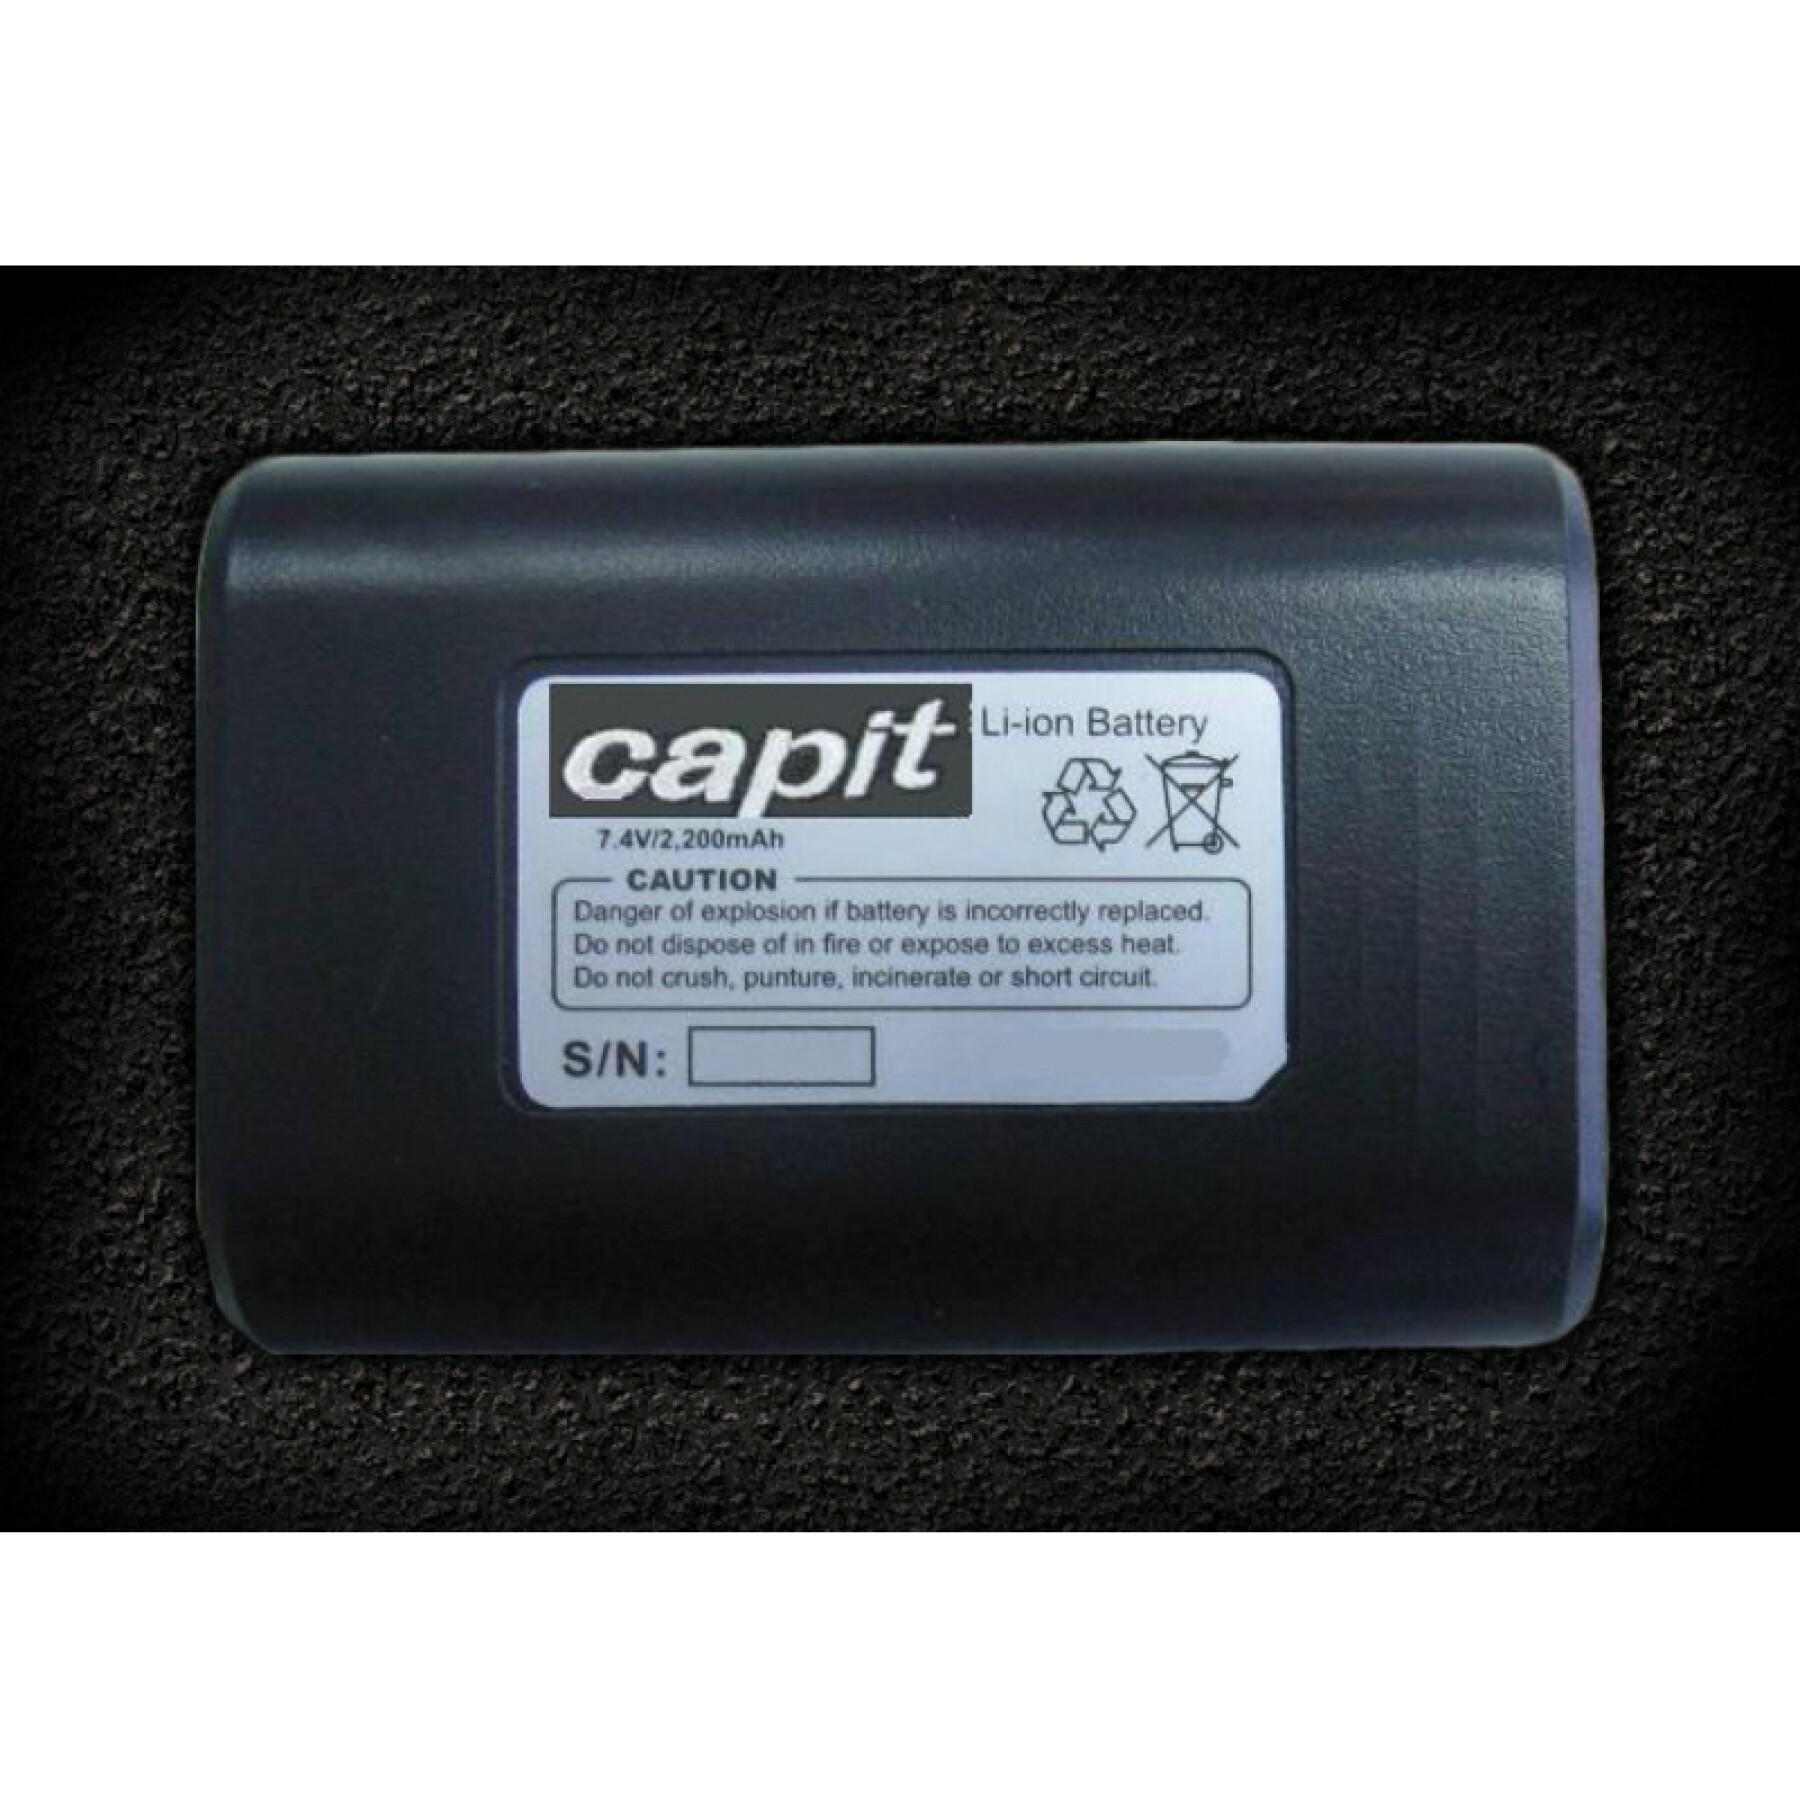 Replacement lithium battery Capit